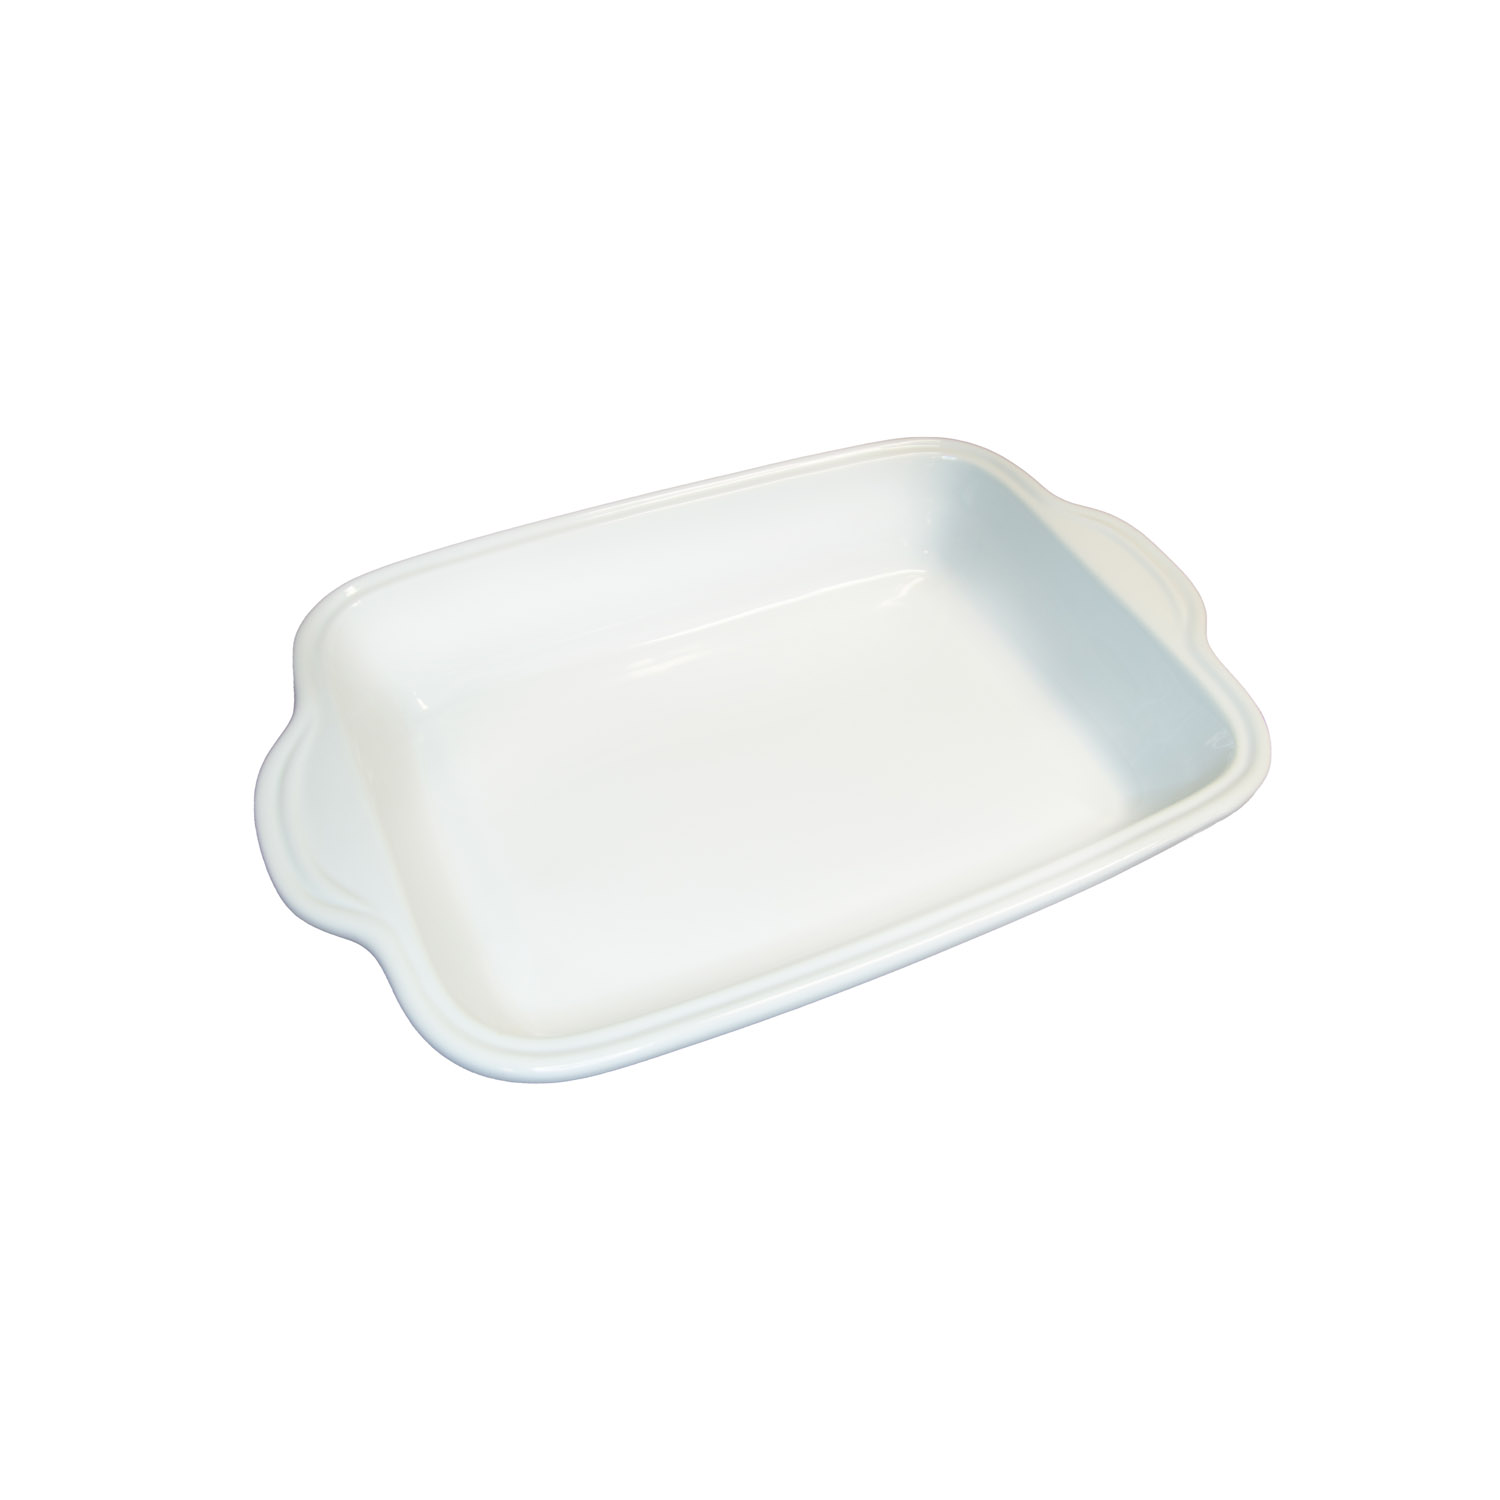 CAC China BF-61 Super White Porcelain Food Pan with Handles 16 1/4" - 6 pcs